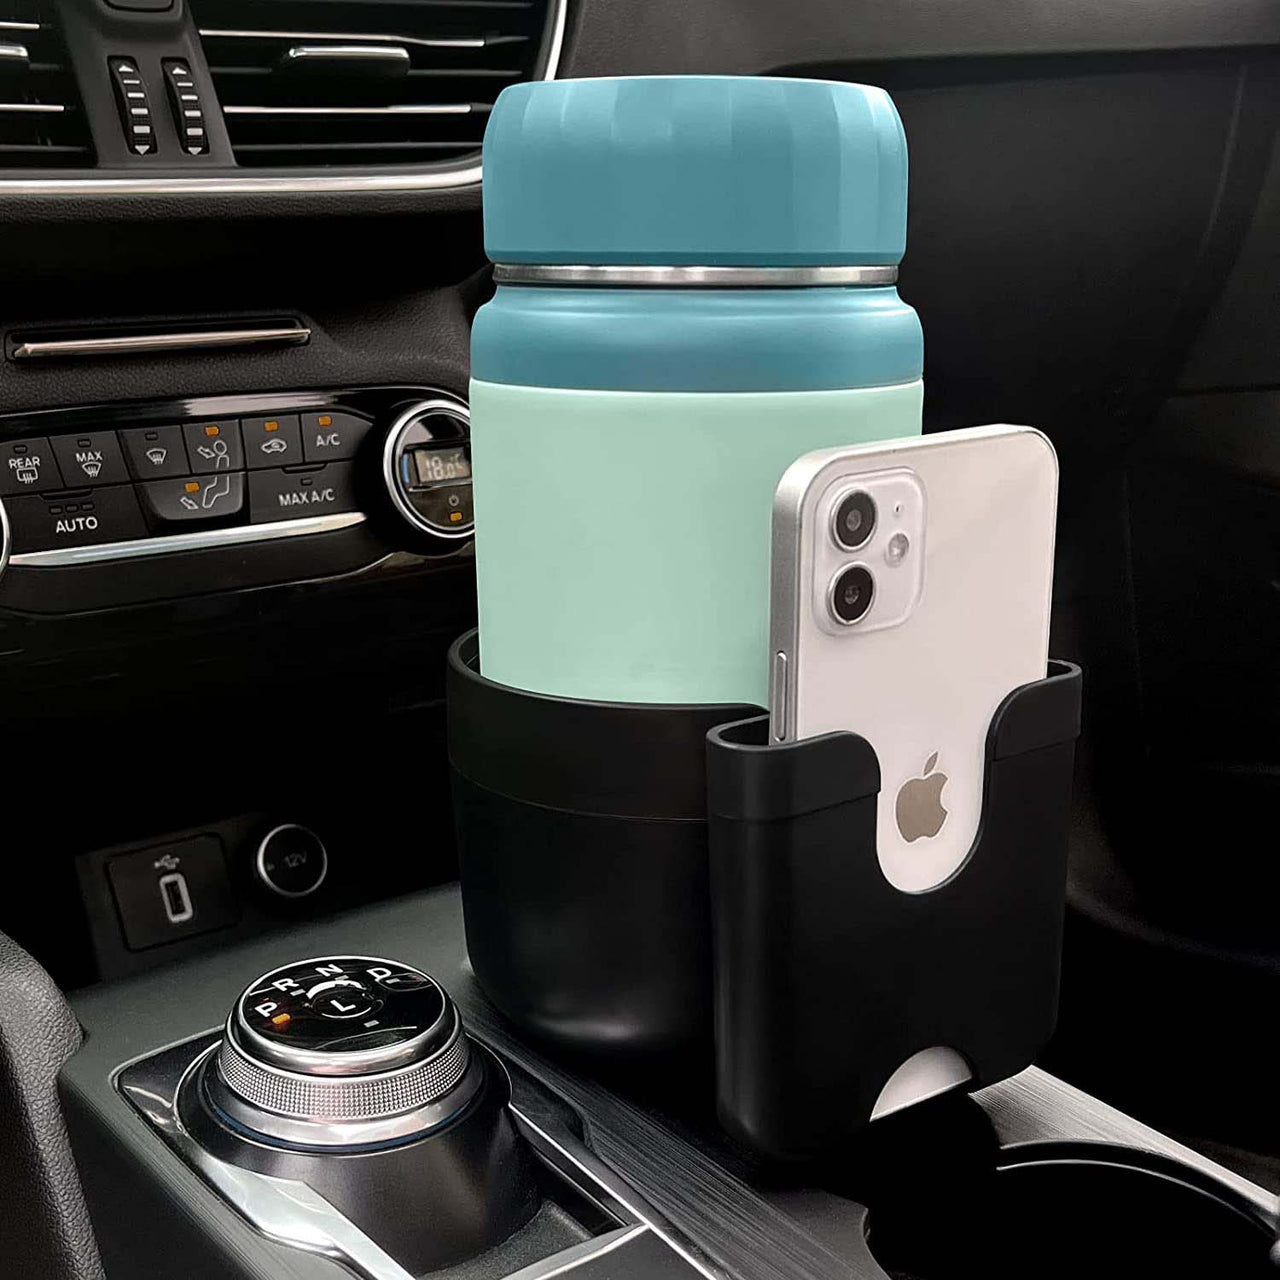 2-in-1 Car Cup Holder Expander Adapter with Adjustable Base, Custom Fit For Your Cars, Car Cup Holder Expander Organizer with Phone Holder, Fits 32/40 oz Drinks Bottles, Car Accessories MS15988